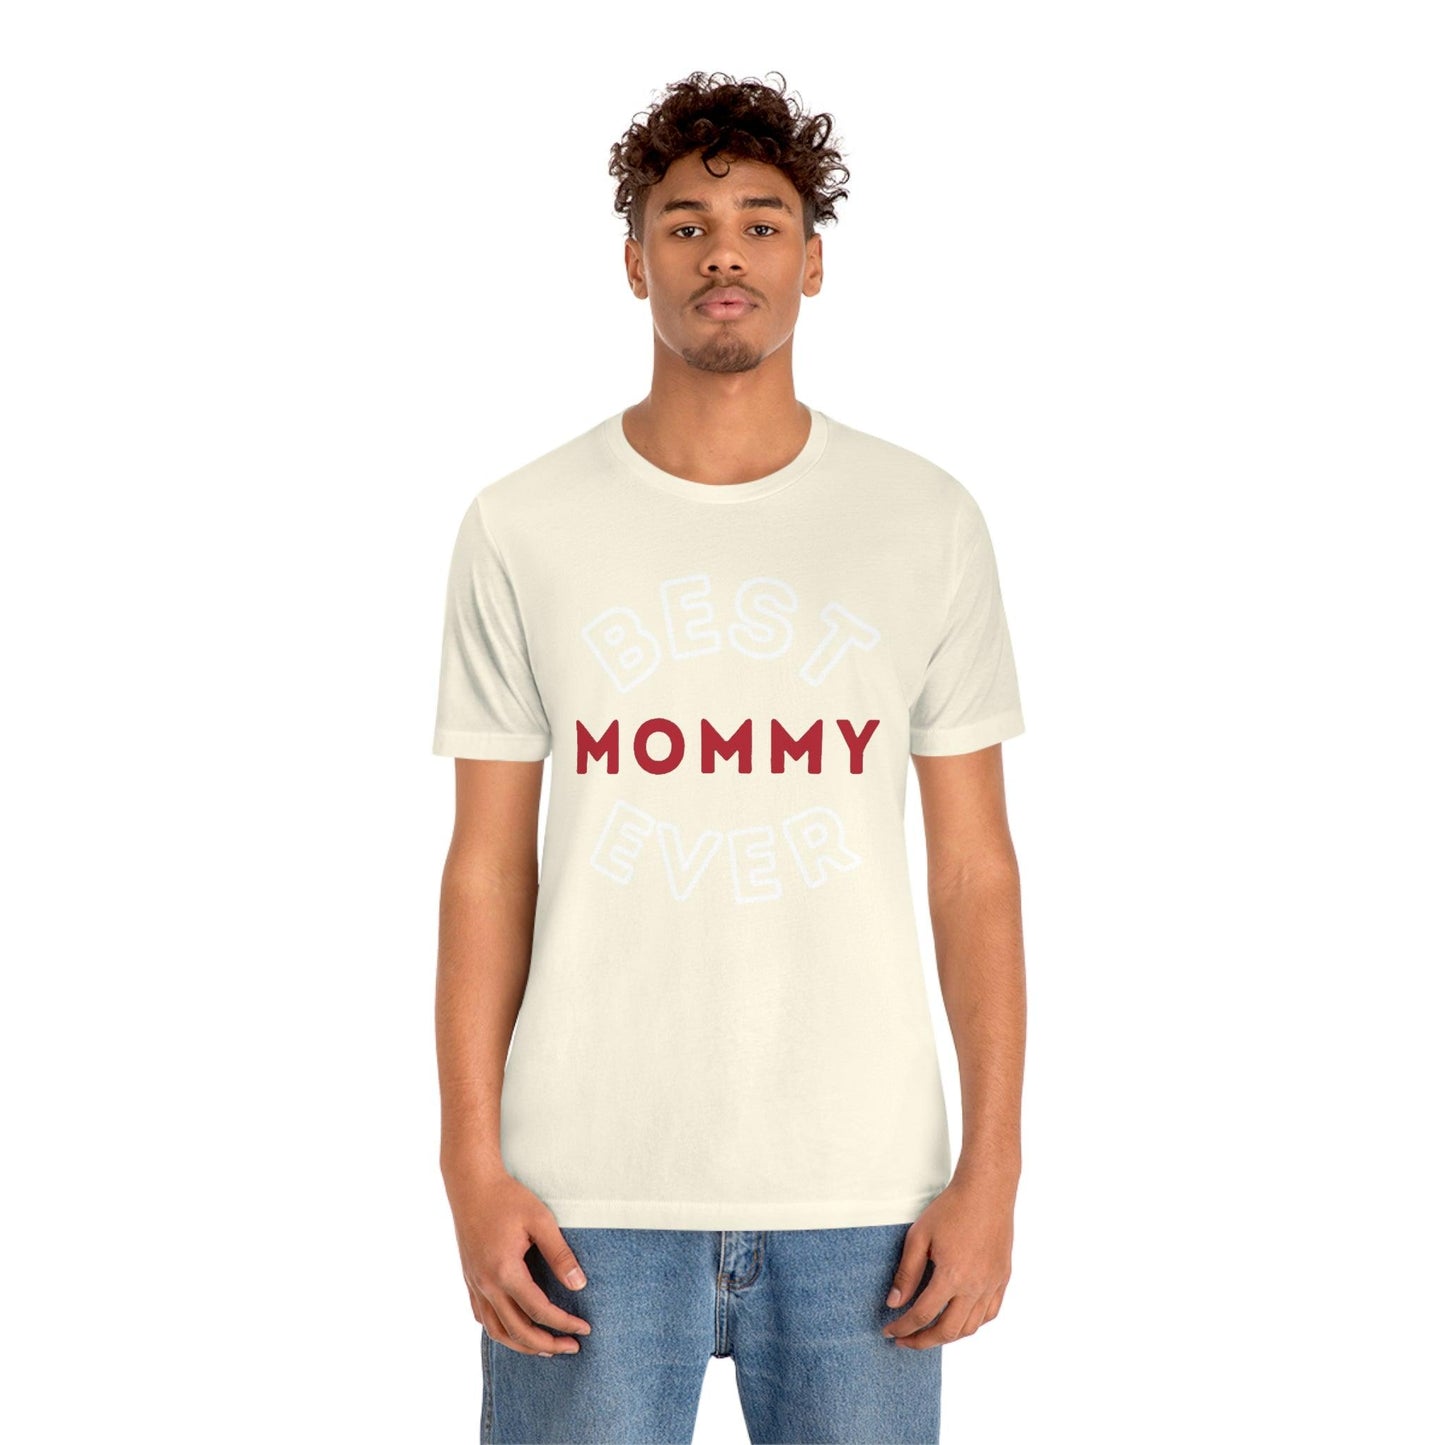 Best Mommy Ever Shirt, Mothers day shirt, gift for mom, Mom birthday gift, Mothers day t shirts, Mothers shirts, Best mothers day gifta